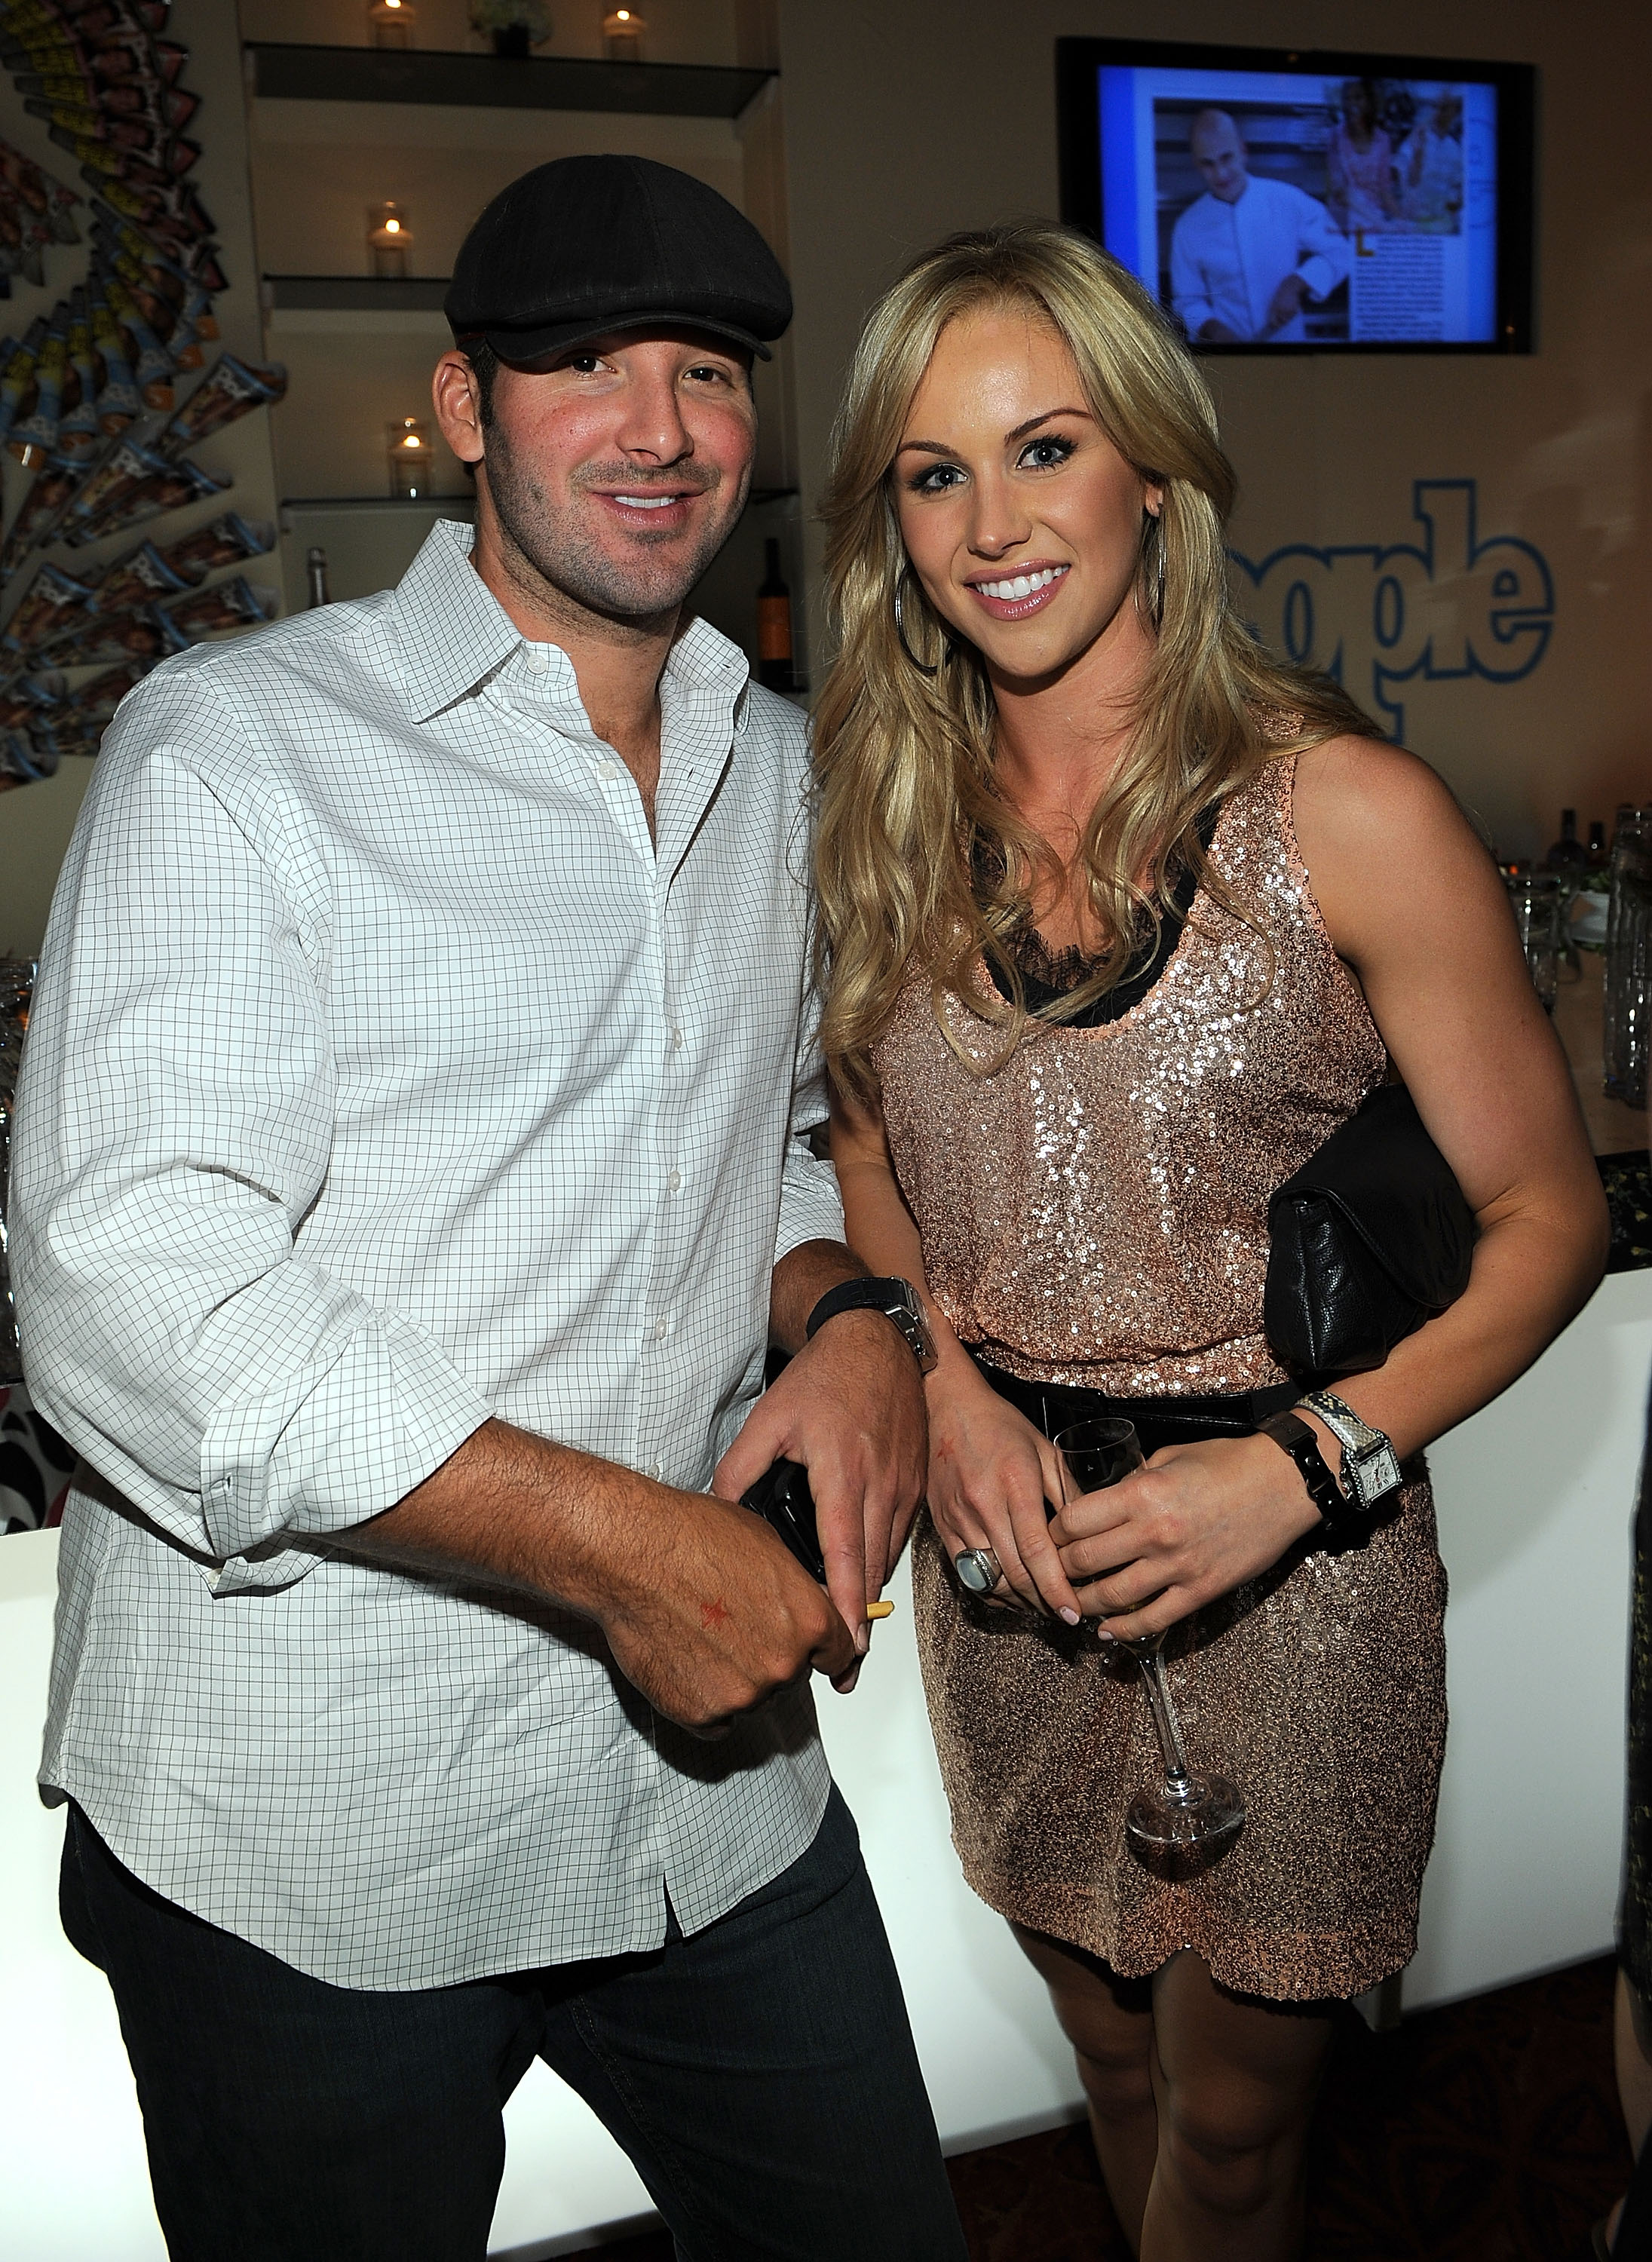 Dallas Cowboys Breaking News: Tony Romo Pops The Question, She Says Yes, News, Scores, Highlights, Stats, and Rumors